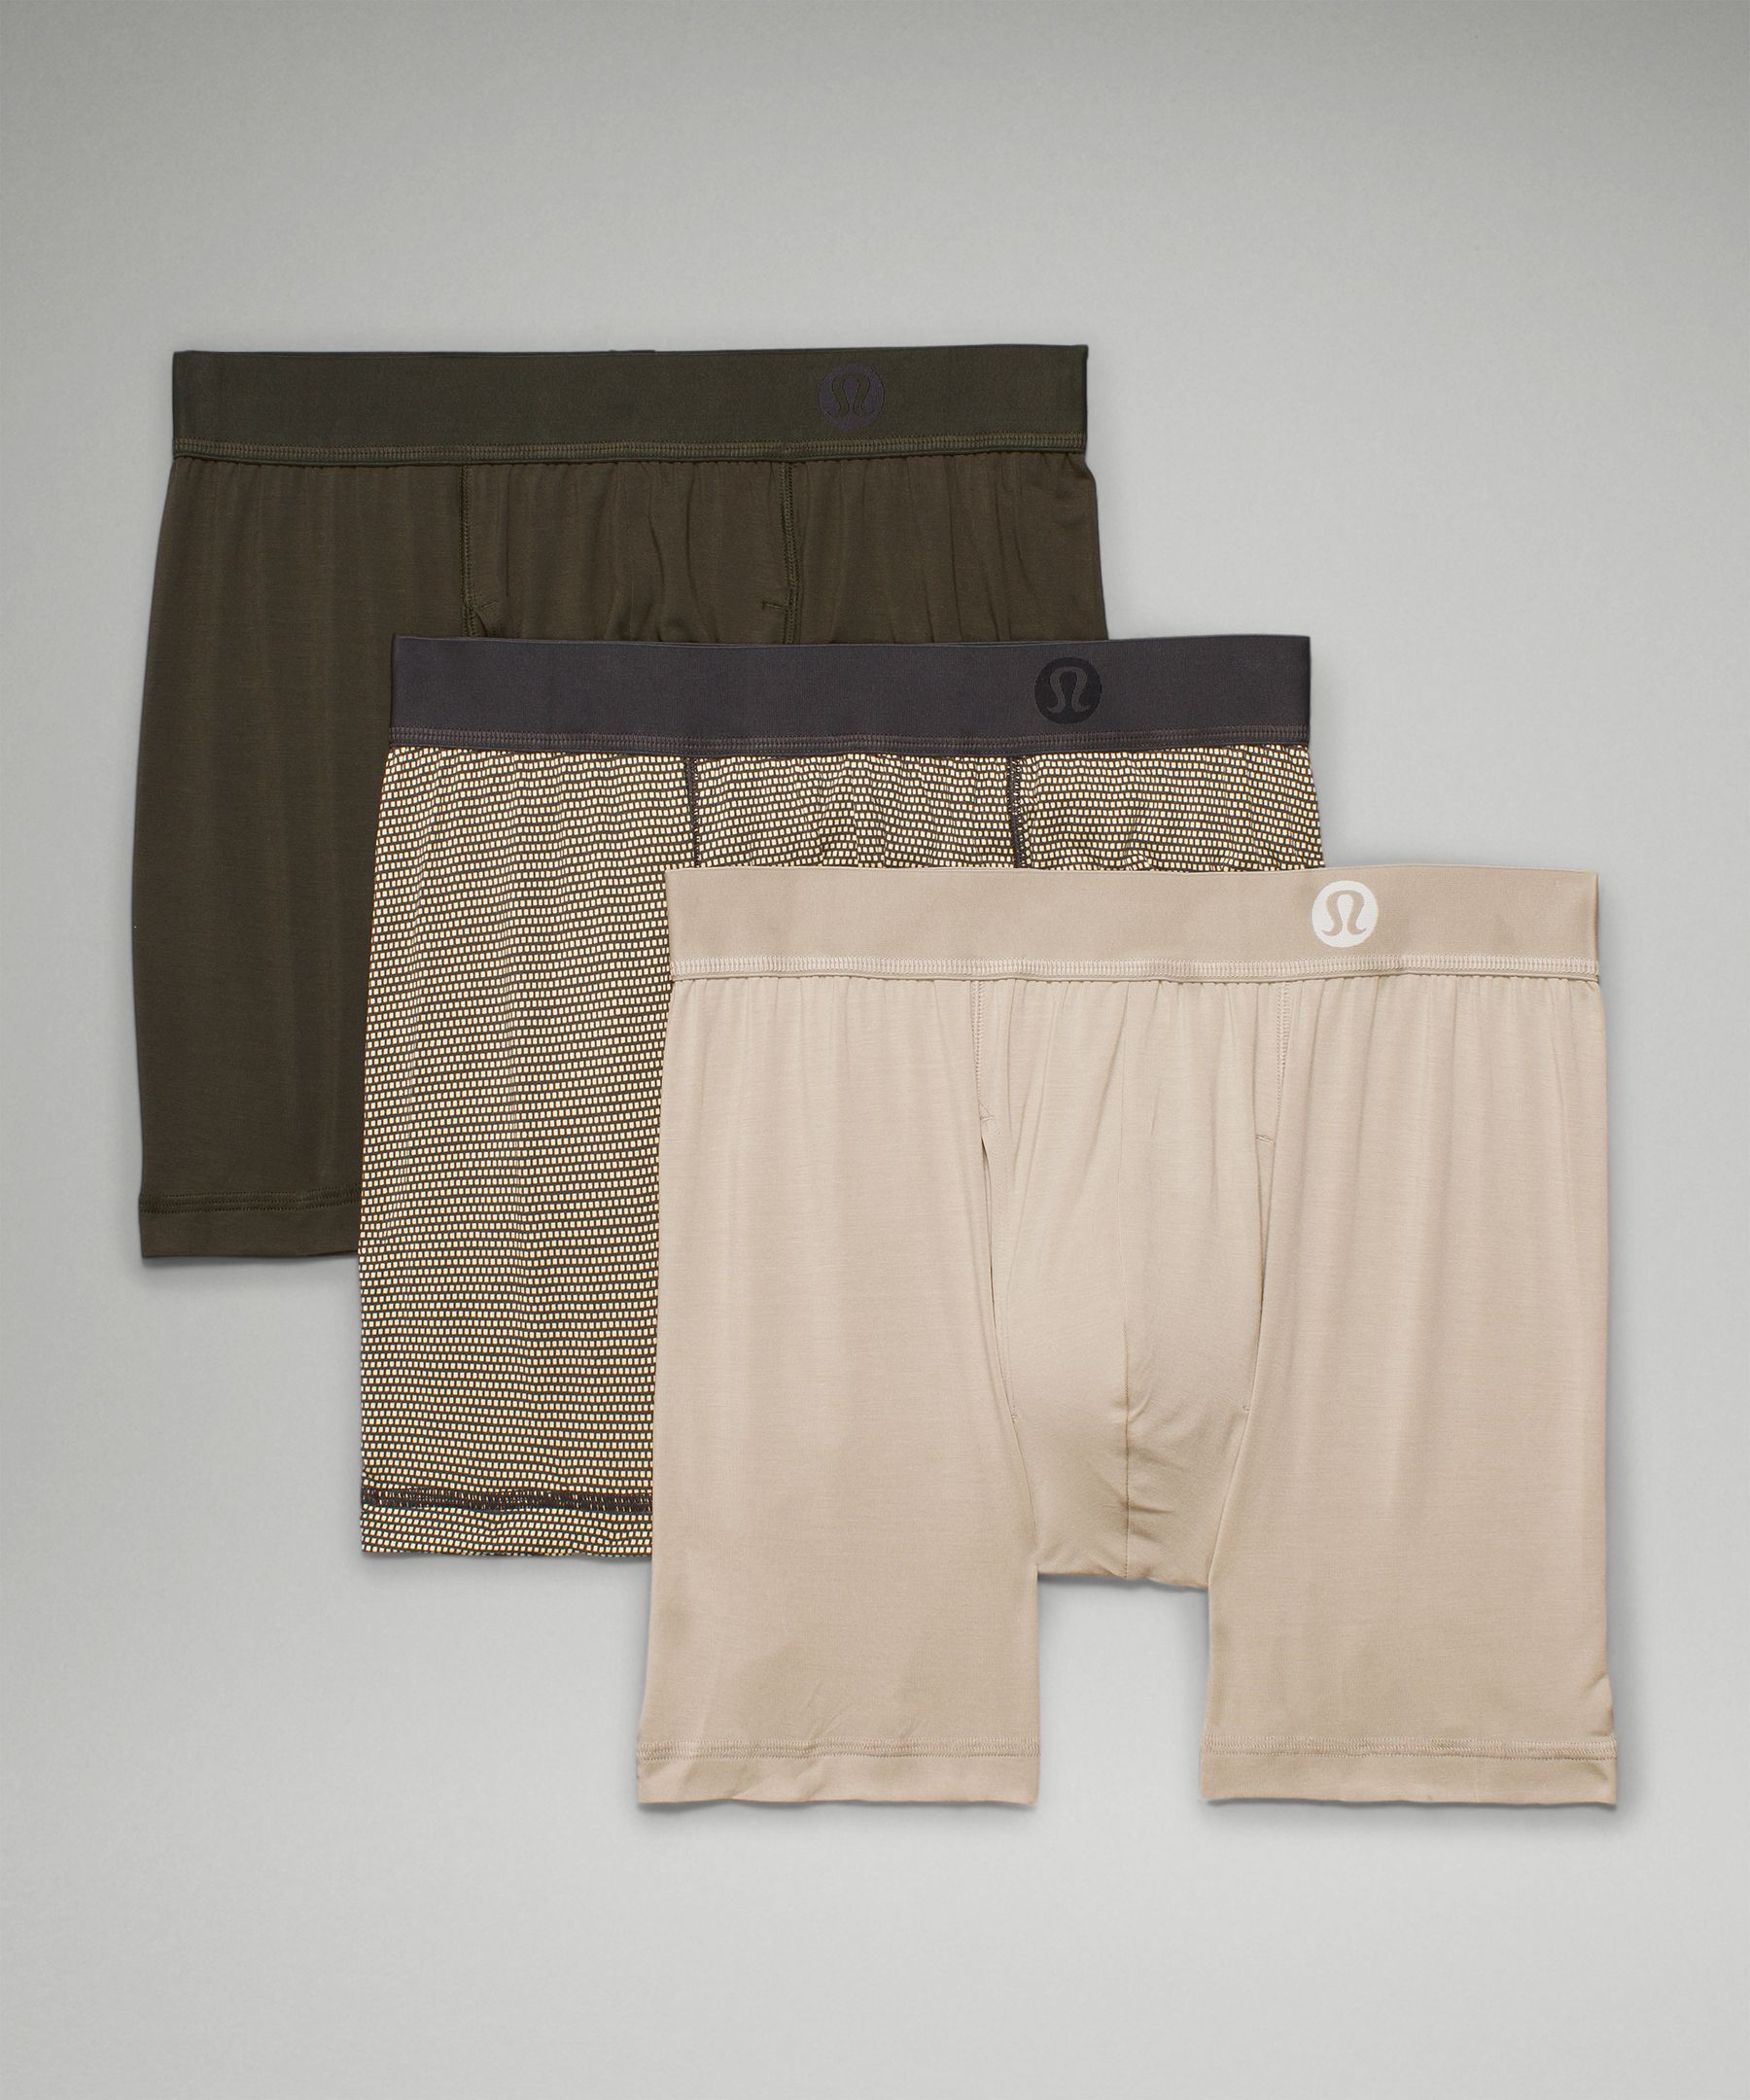 Lululemon Always In Motion Boxers With Fly 3 Pack In Polka Squat Inverse Lemon Chiffon Graphite Grey/dark Olive/raw Linen